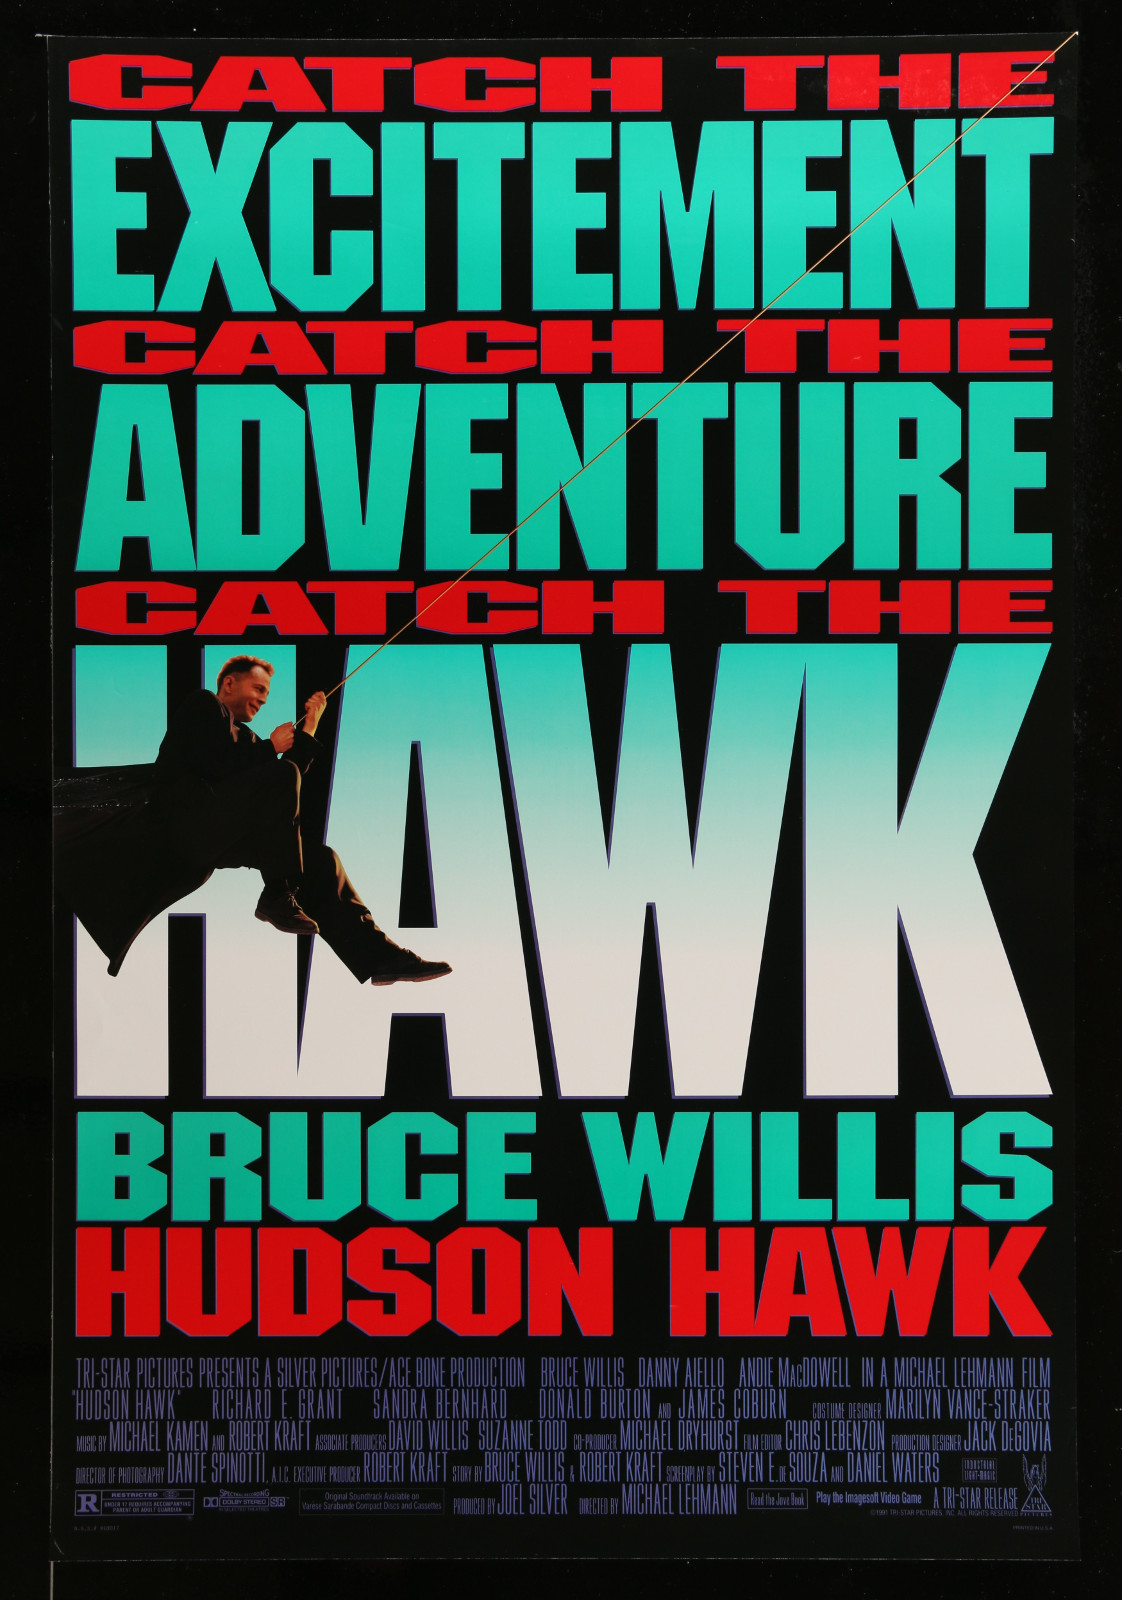 Hudson Hawk 2A457 A Part Of A Lot 16 Unfolded Mostly Single-Sided Mostly 27X41 One-Sheets '80S-90S Great Movie Images!